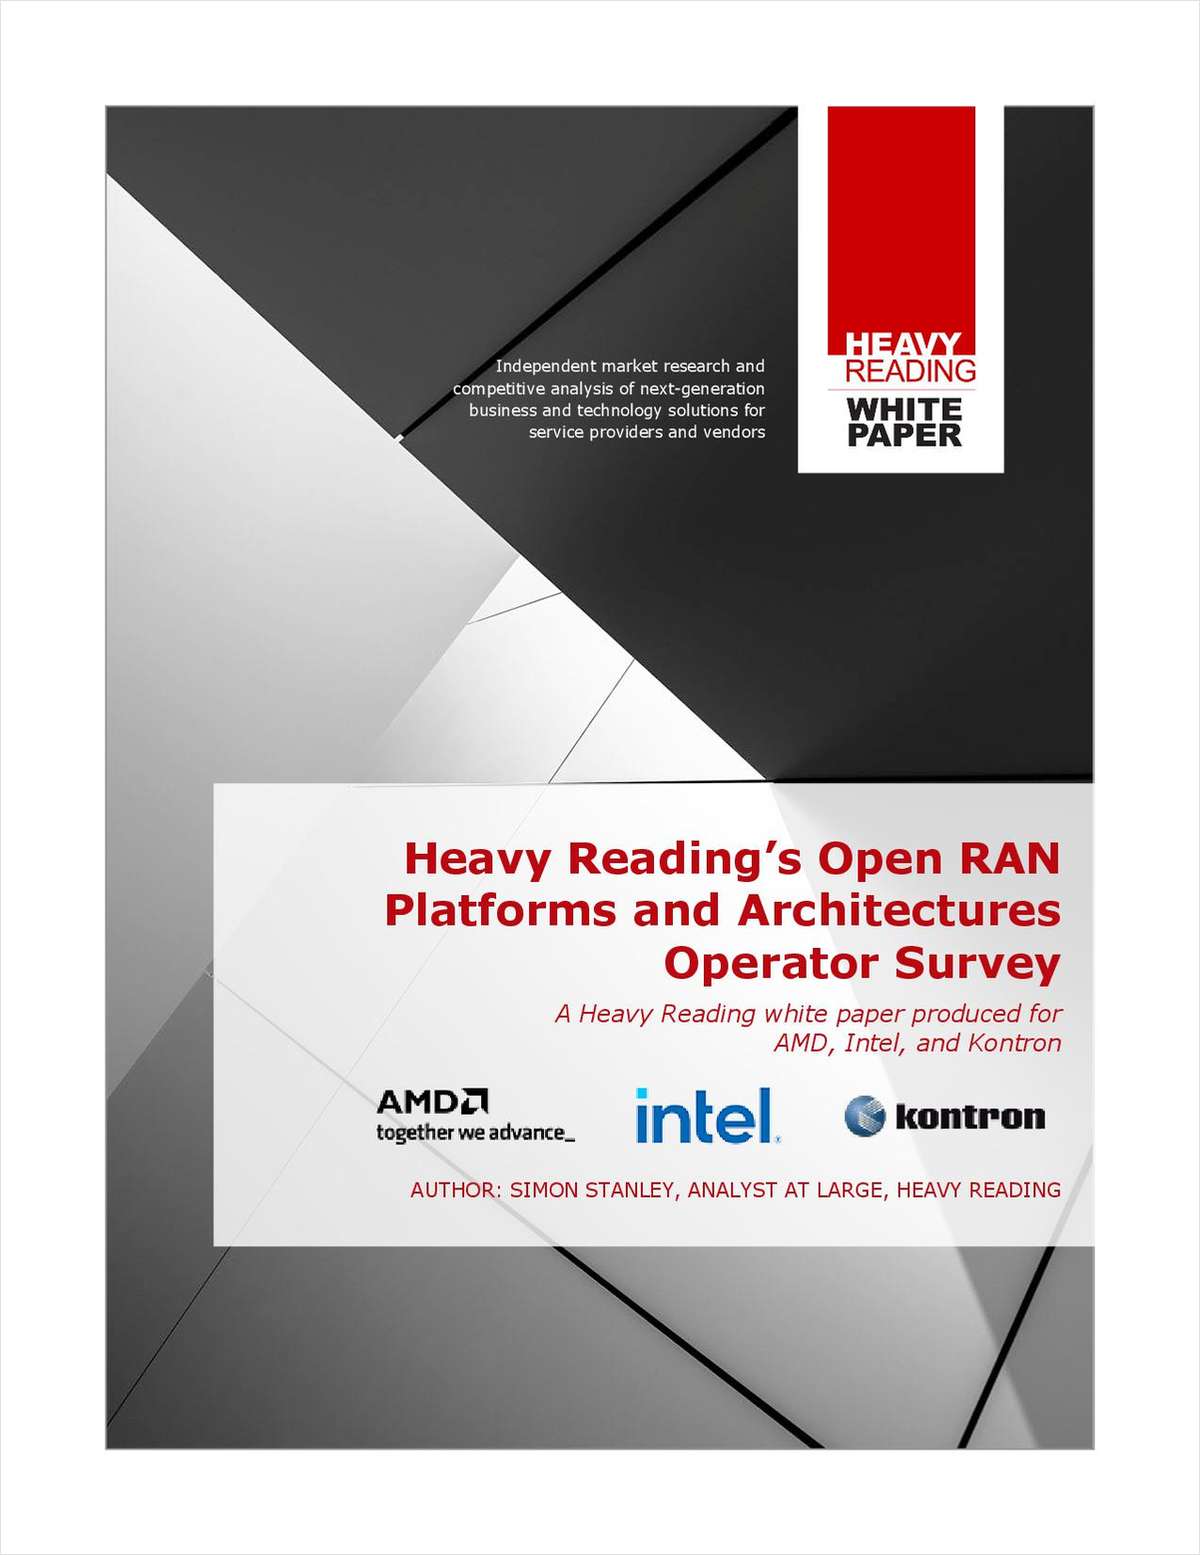 Open RAN Platforms and Architectures Operator Survey Report